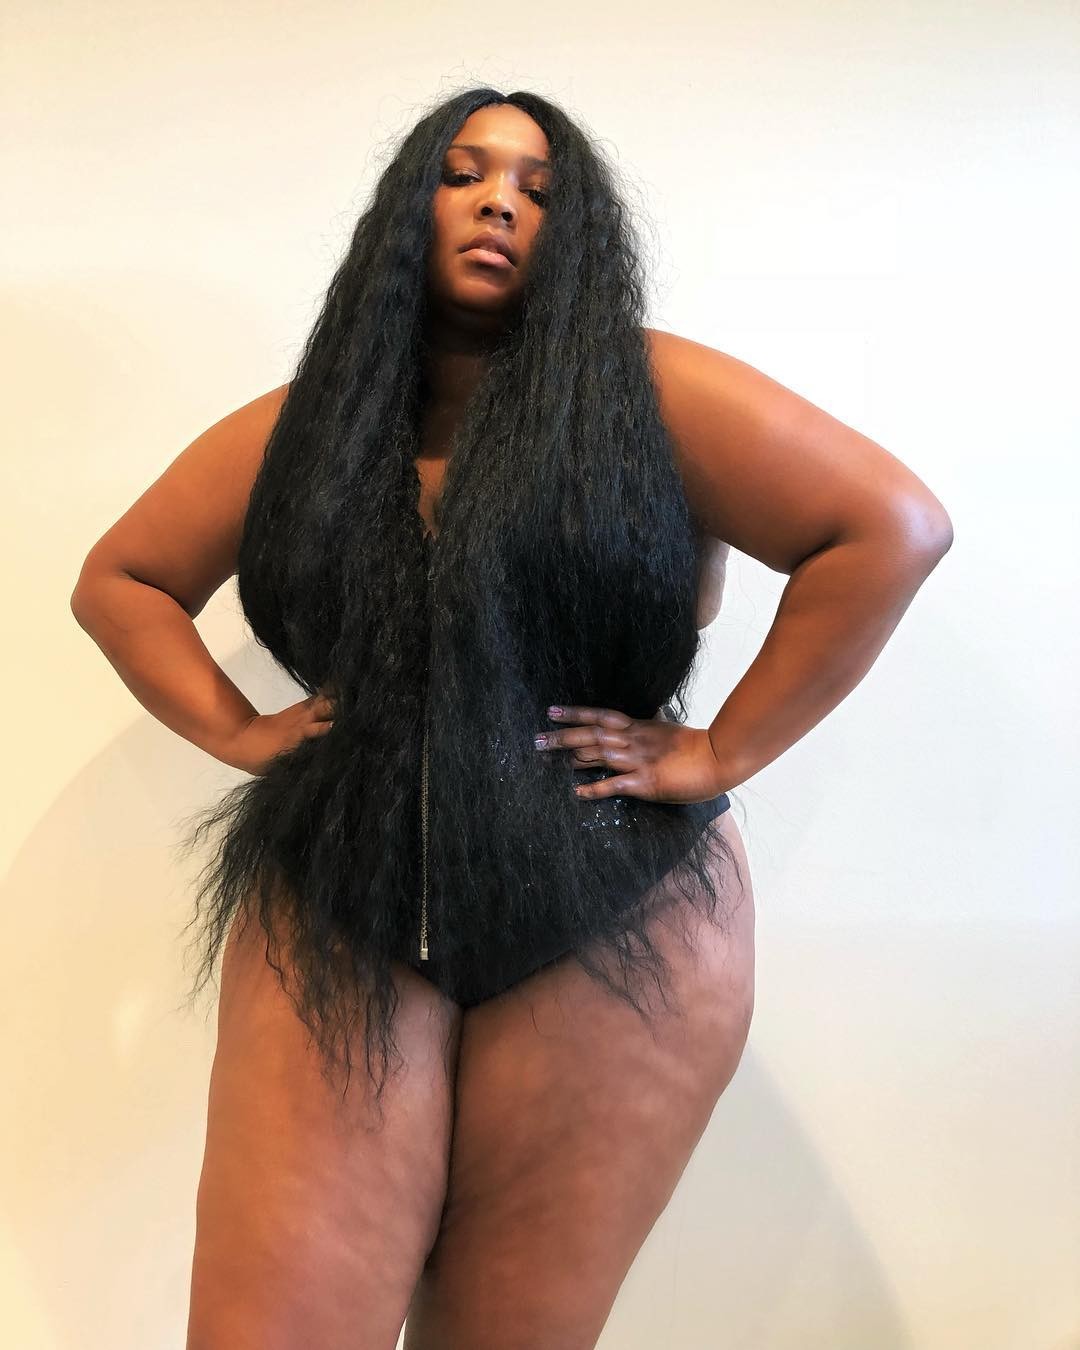 Lizzo Nude And Sexy Photos Fat Ass and Boobs (21)